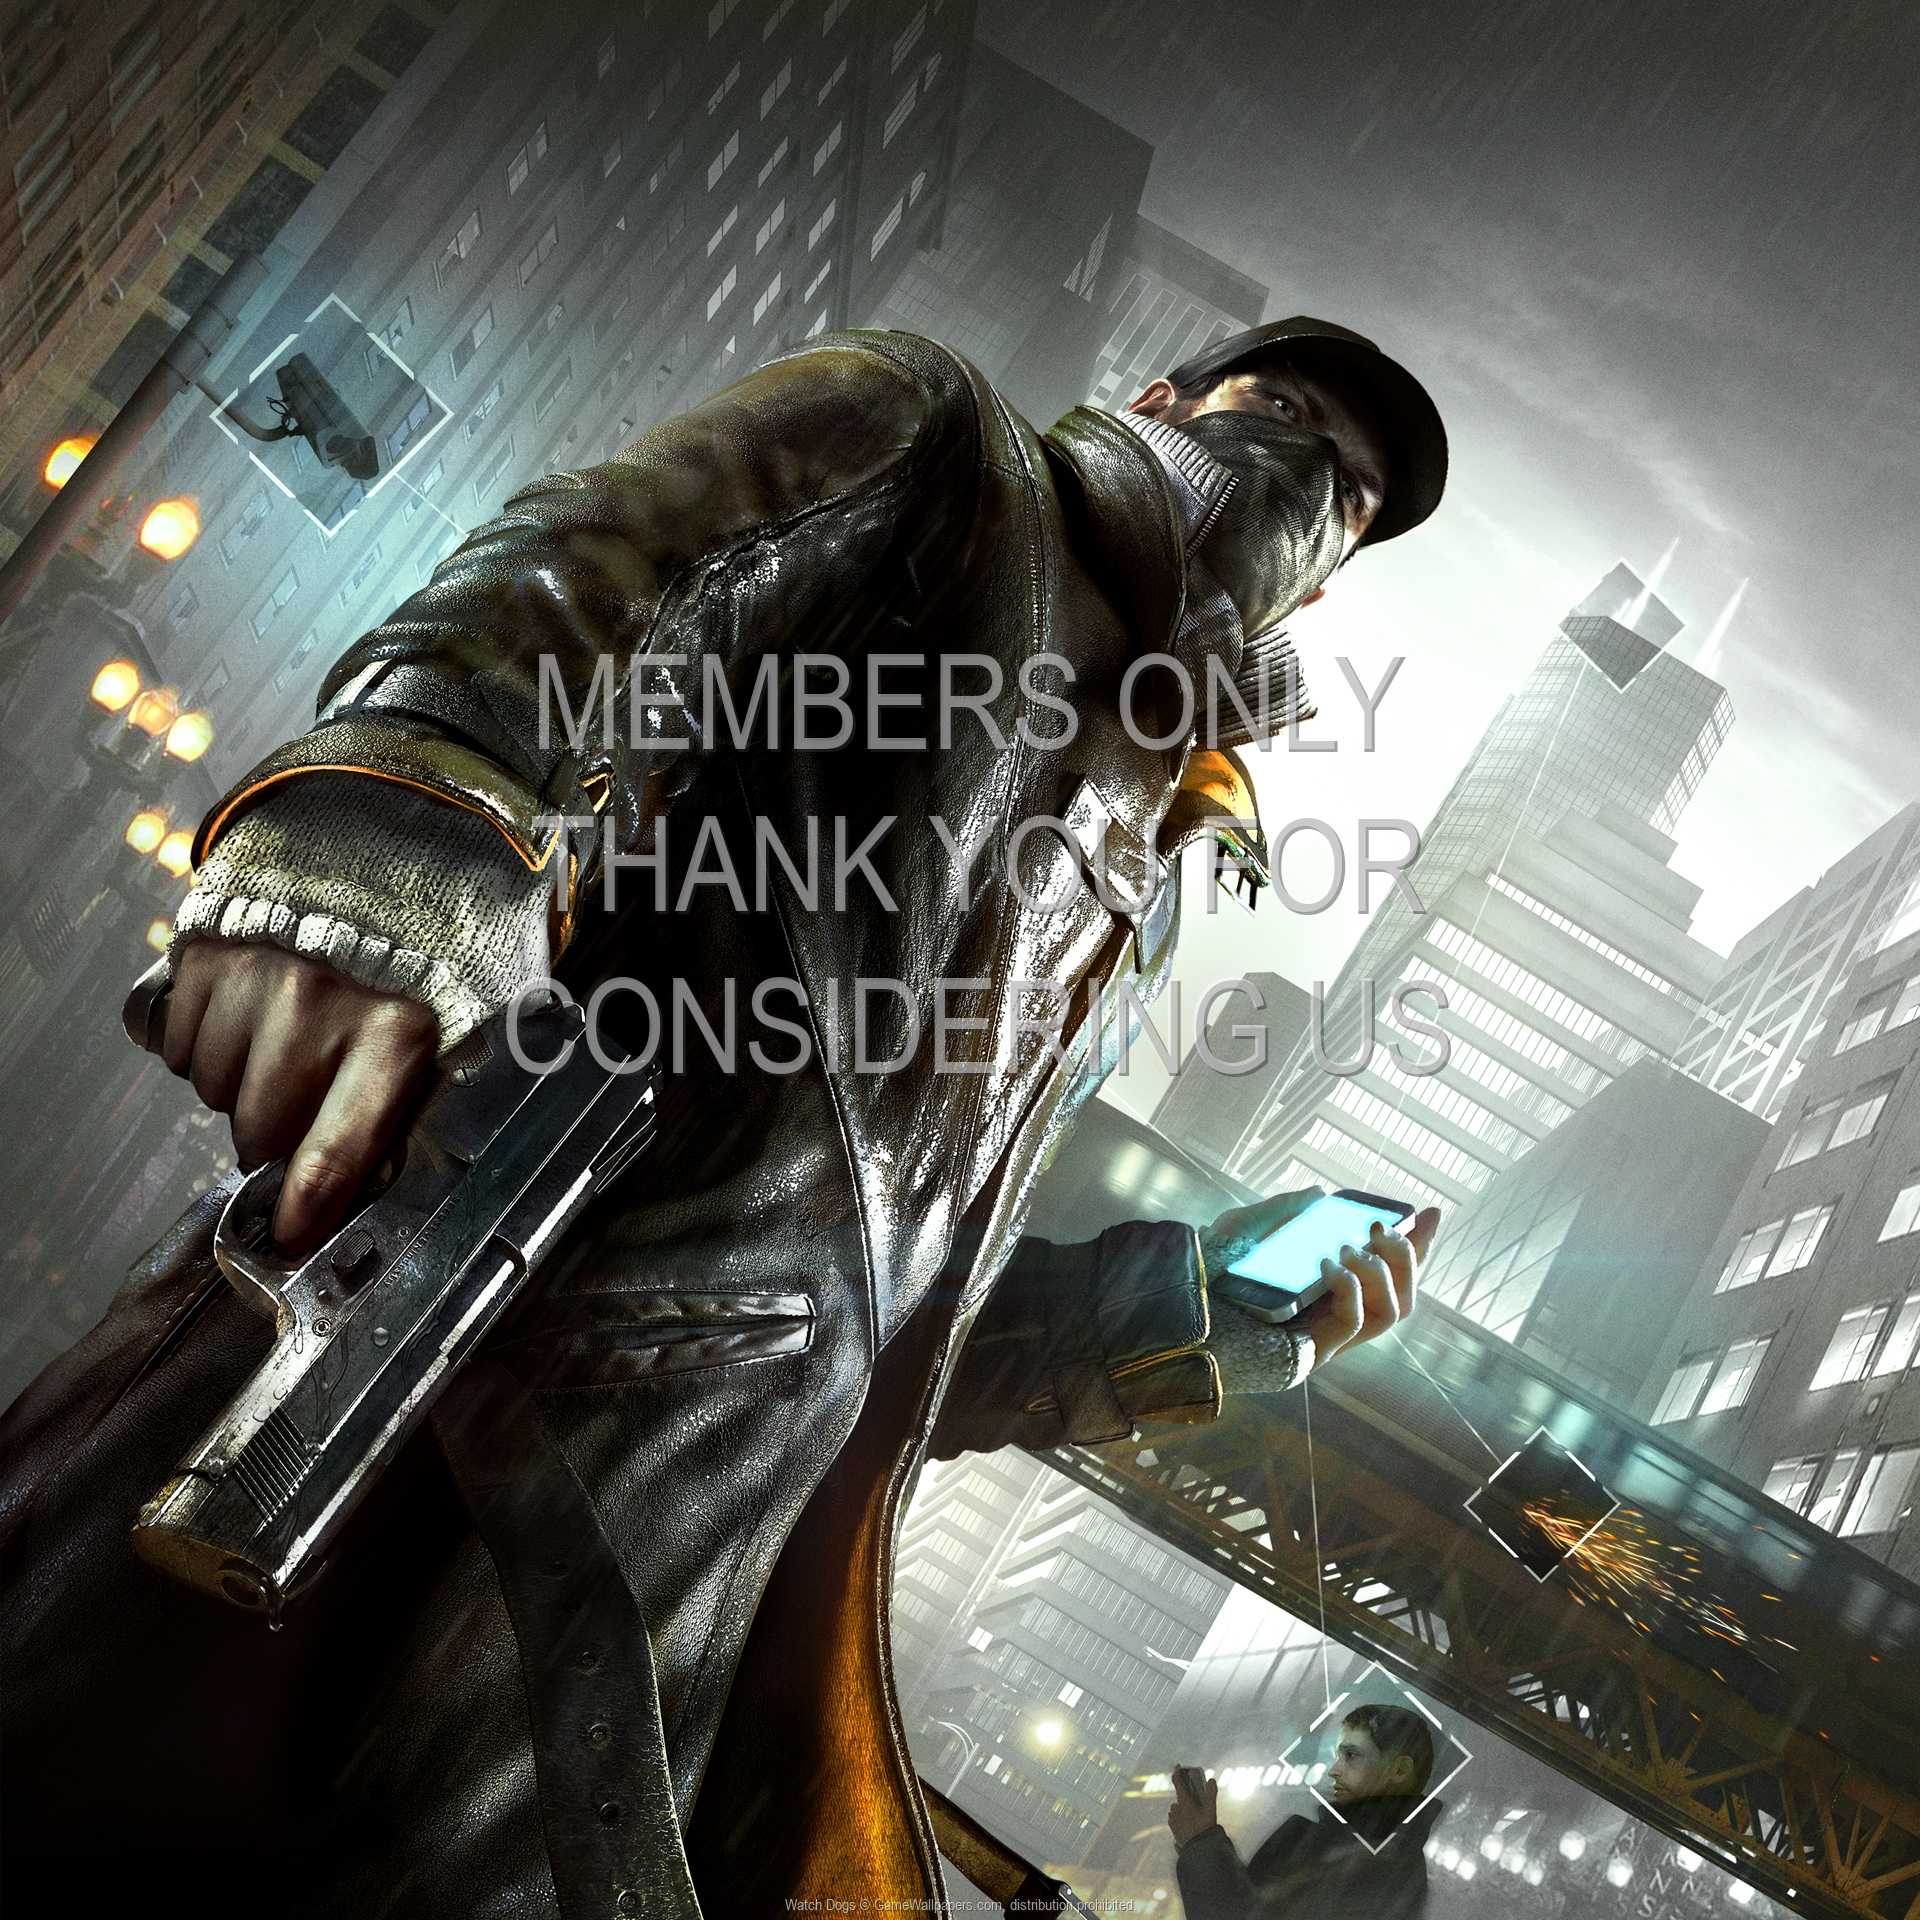 Watch Dogs 1080p Horizontal Mobile wallpaper or background 02